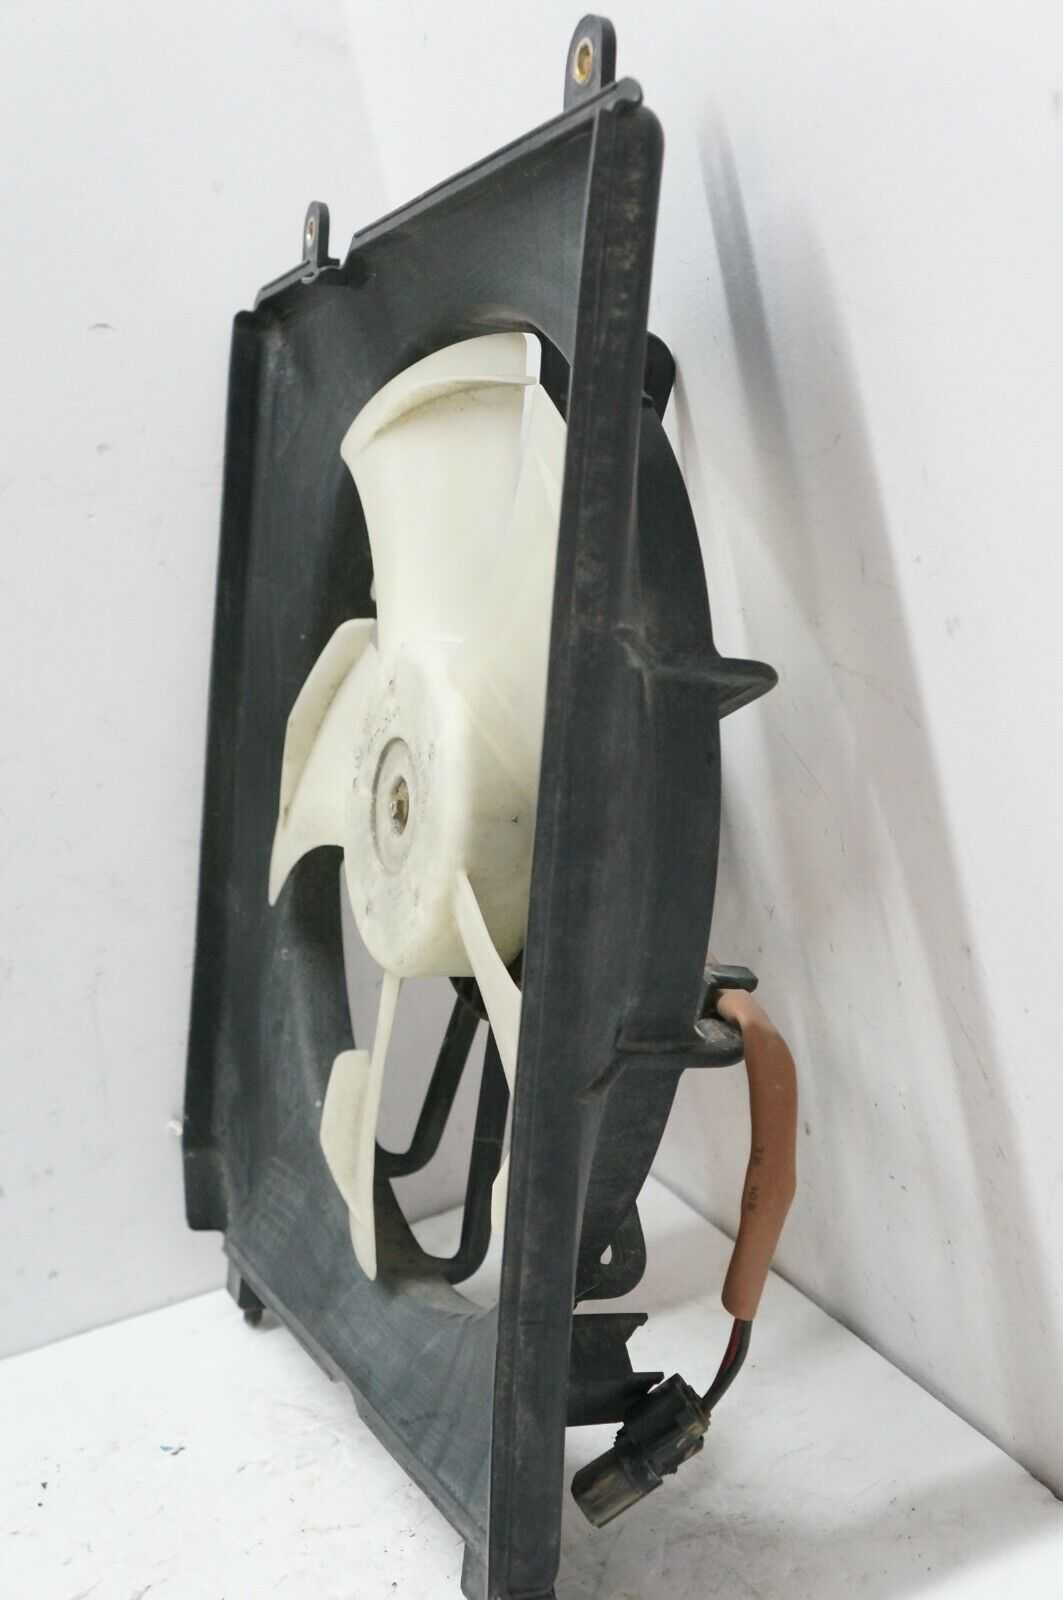 08-12 Honda Accord 2.4 L Radiator Cooling Fan Motor 5 Blades 38611-R40-A01 OEM Alshned Auto Parts